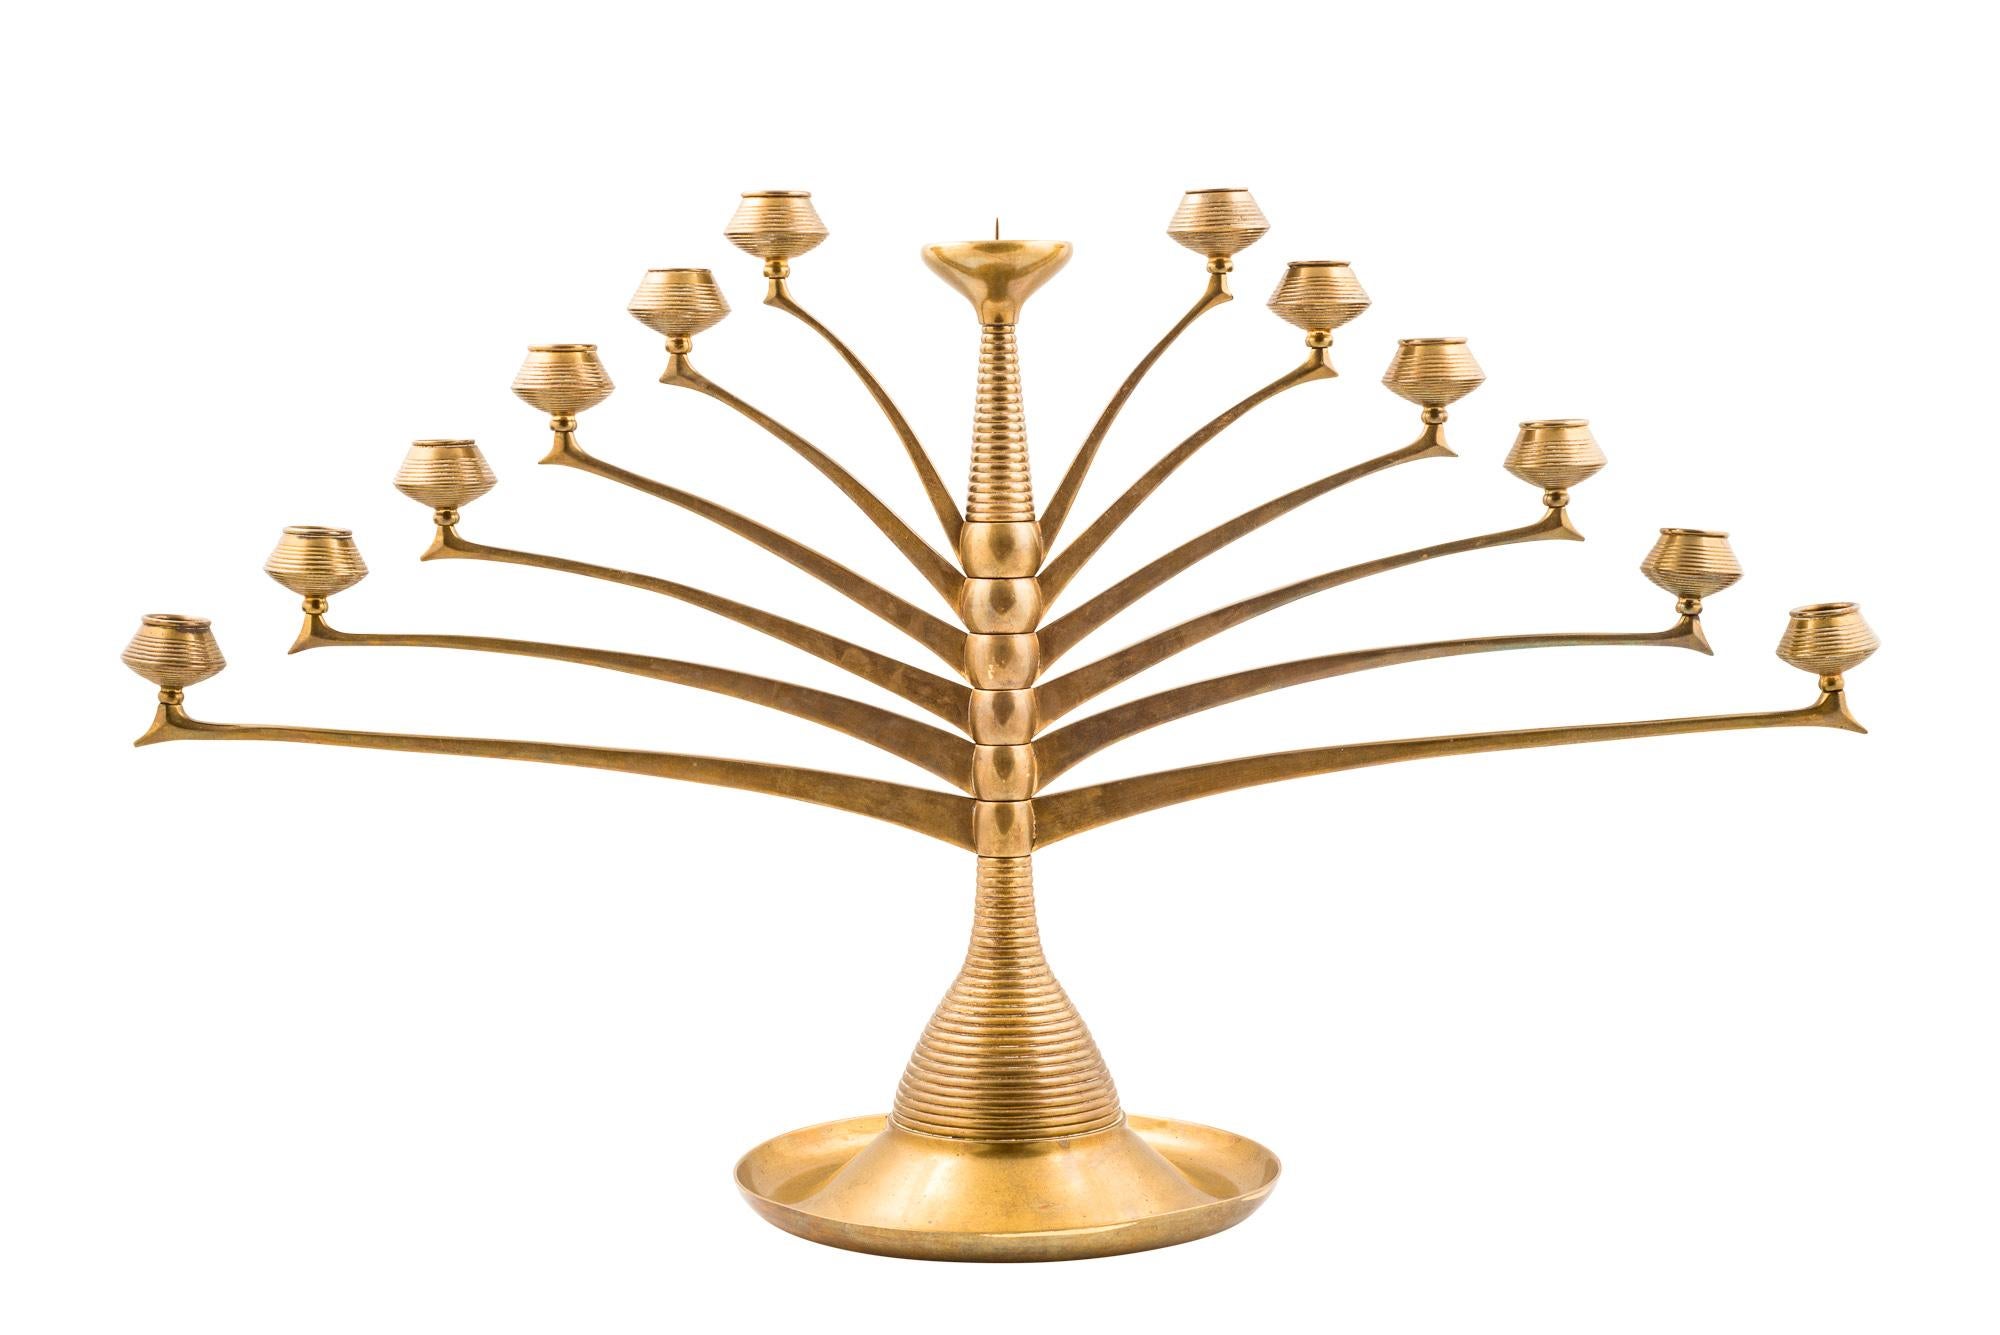 The architect Bruno Paul designed this large candlestick, bearing the model number 58, in 1901. At this time, he had already worked for the “Vereinigten Werkstätten für Kunst im Handwerk” in Munich. As an architect he can be associated with the “New